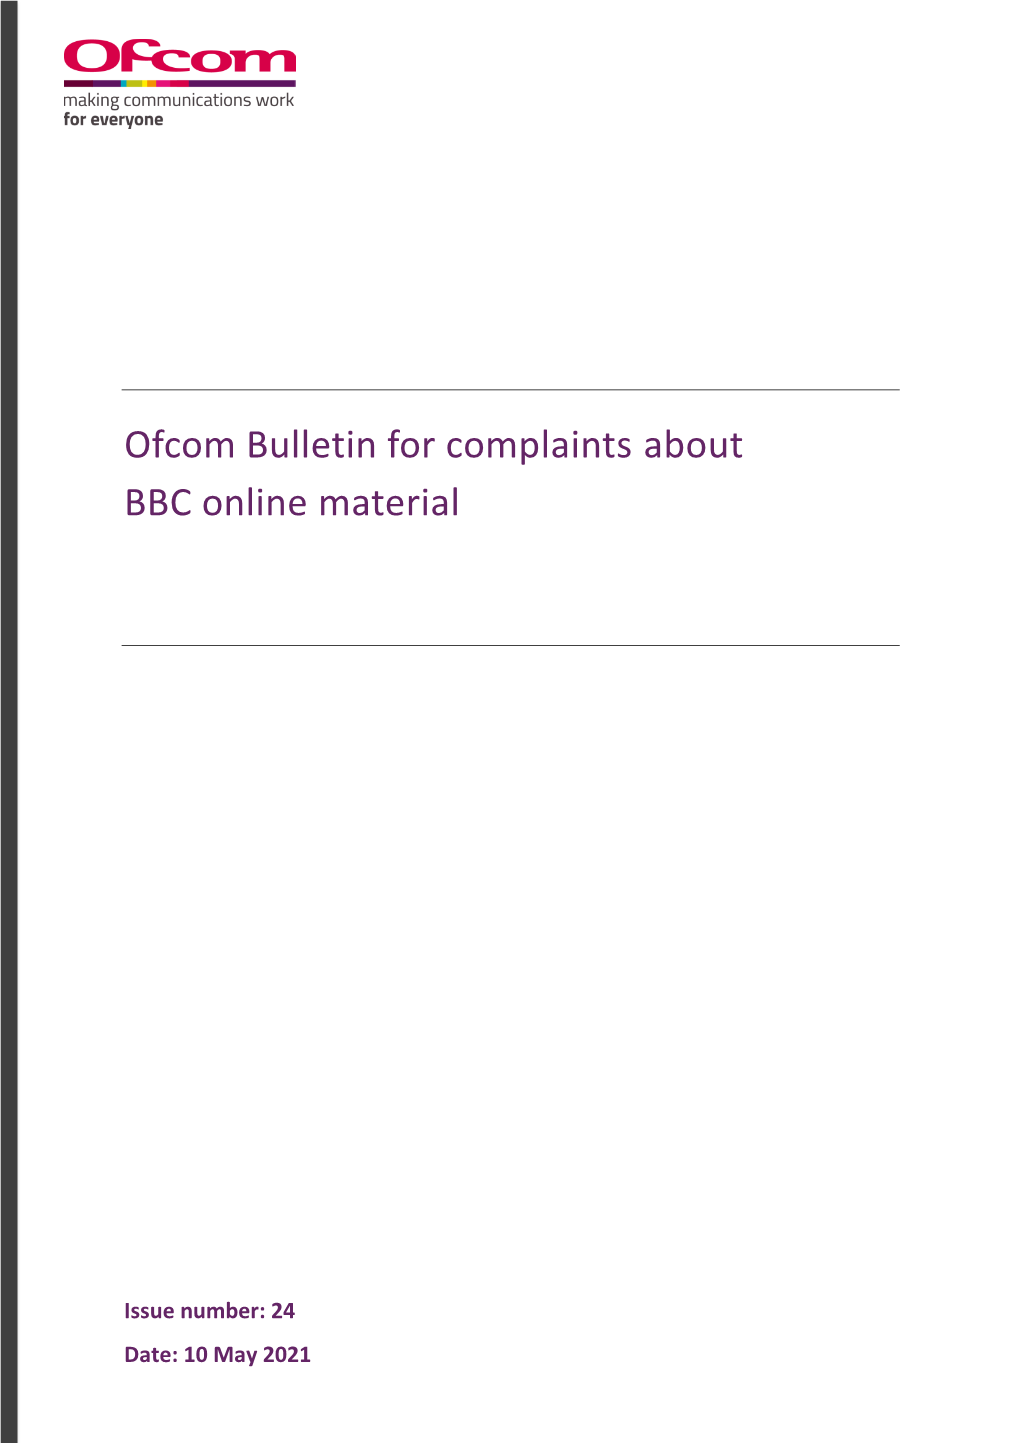 Ofcom Bulletin for Complaints About BBC Online Material